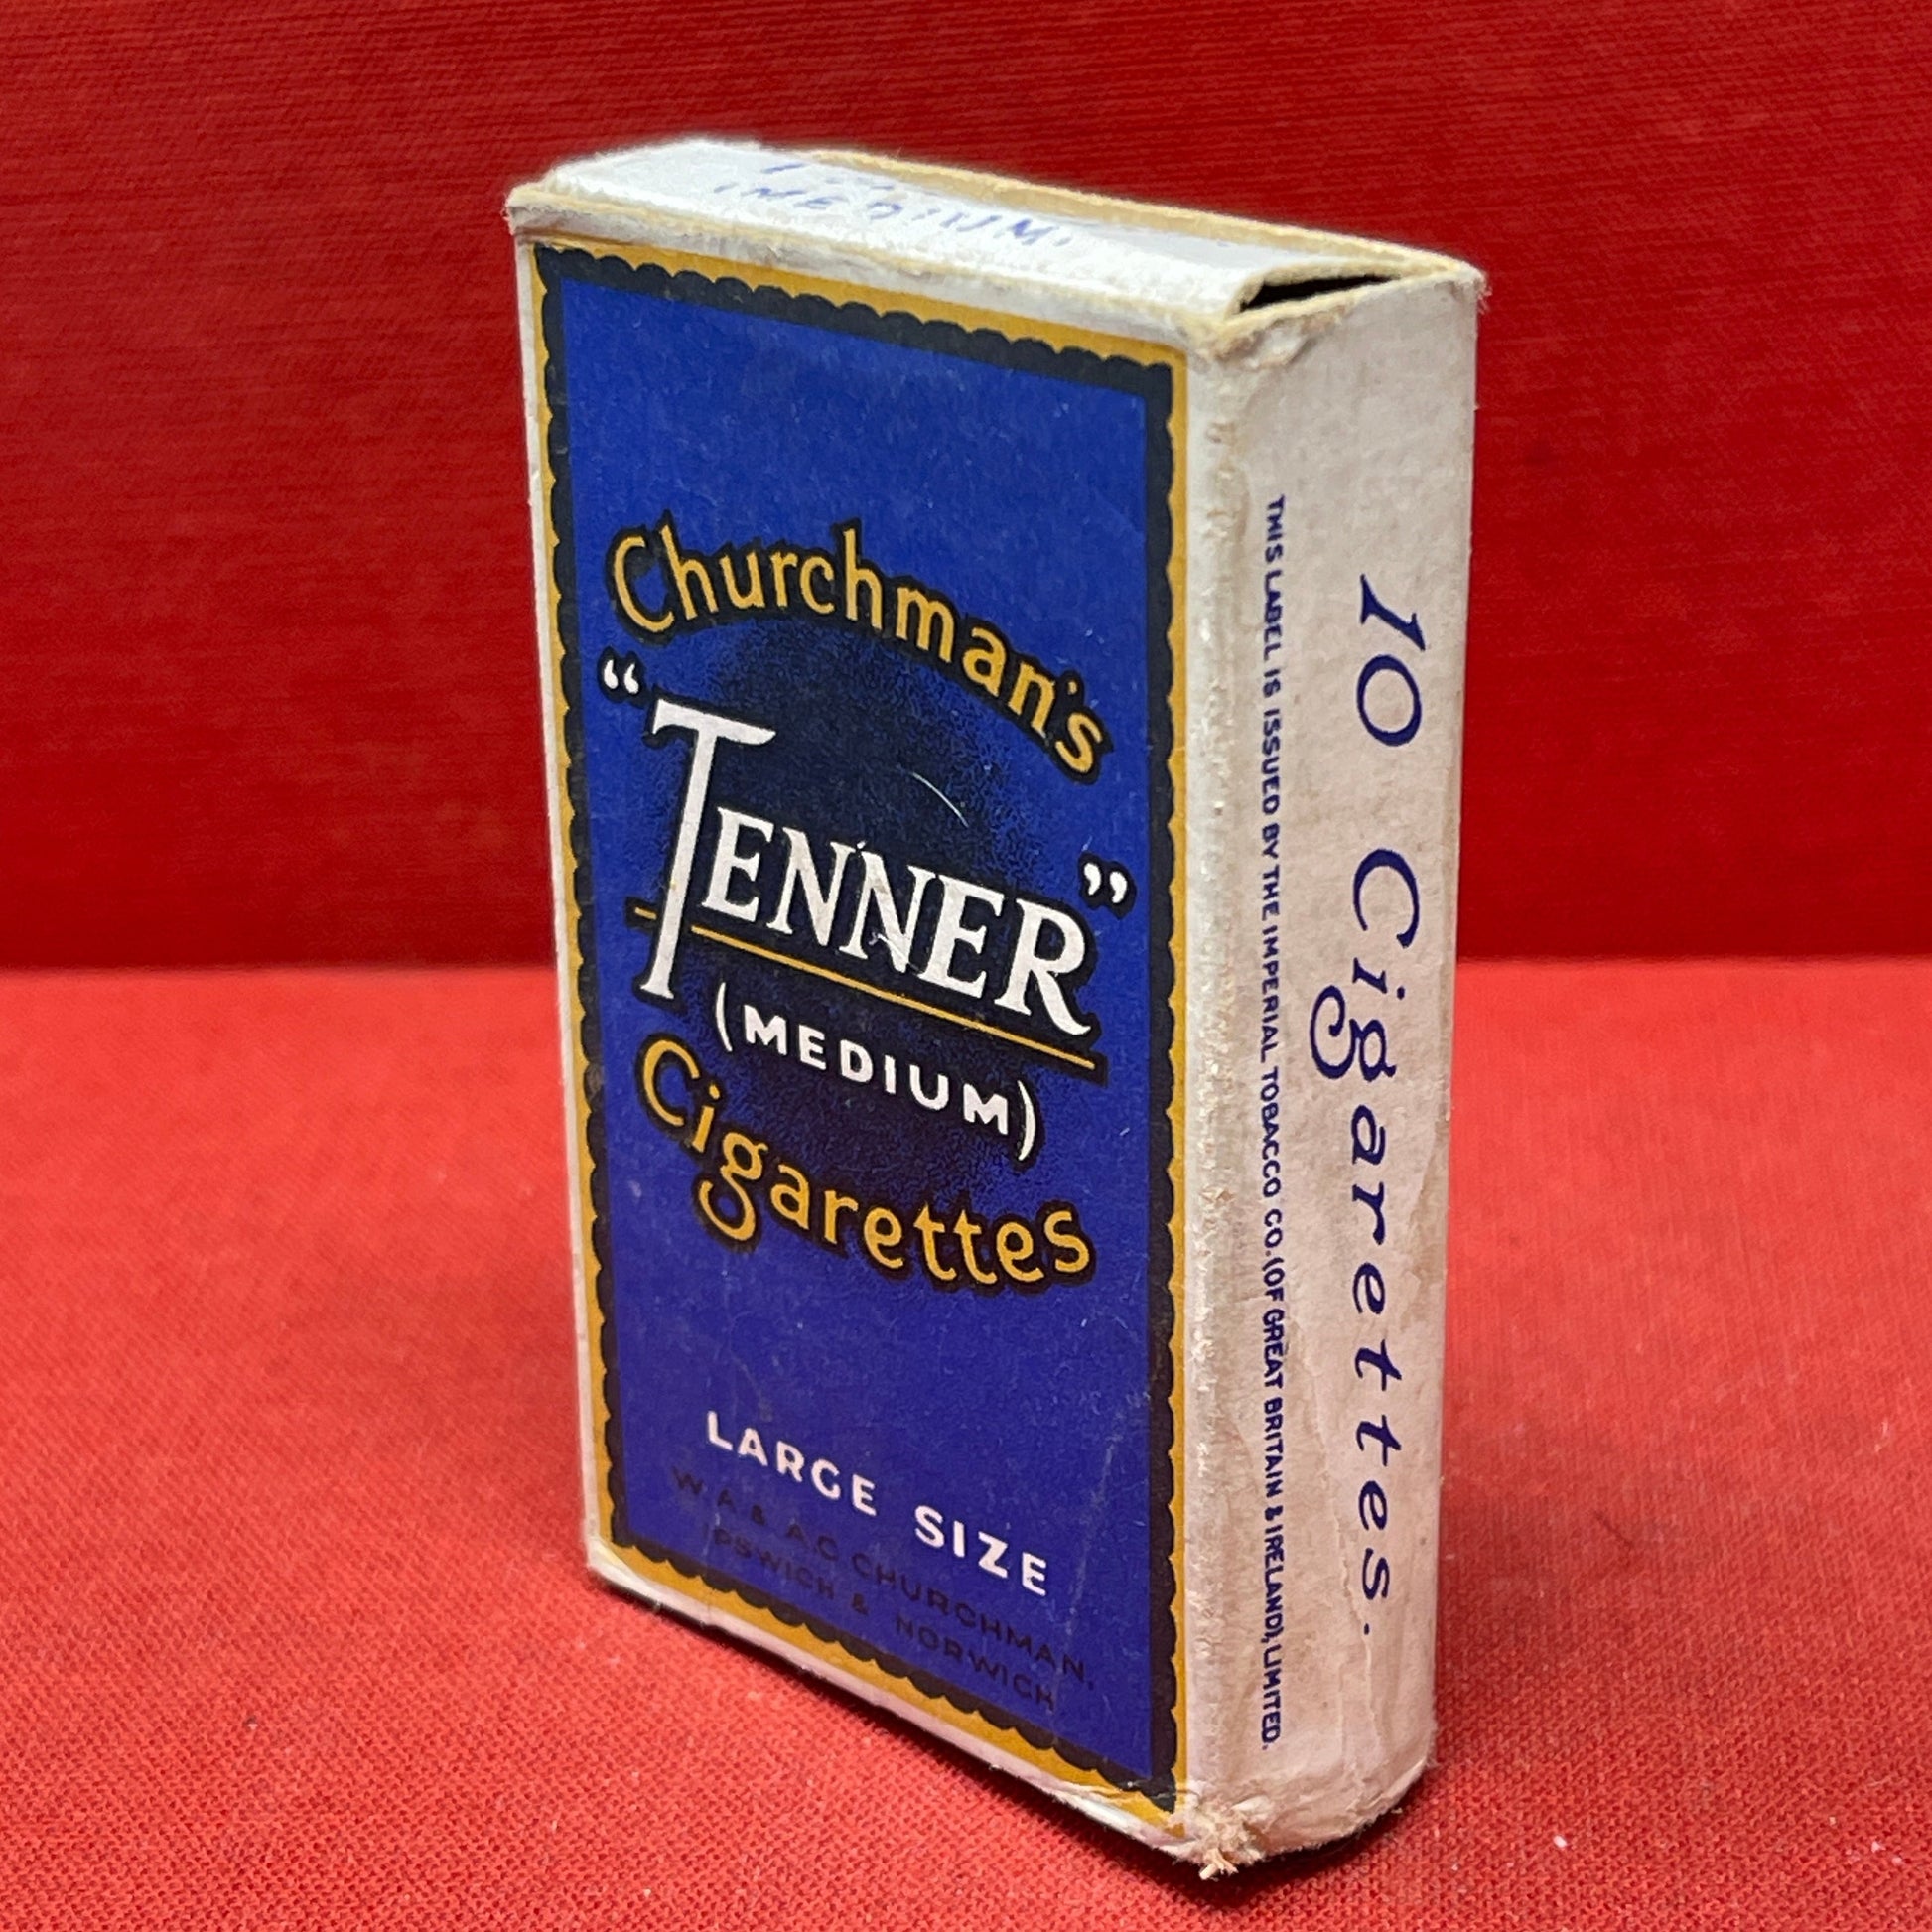 Cardboard cigarette packet consisting of a blue and black-printed sleeve and a cardboard drawer